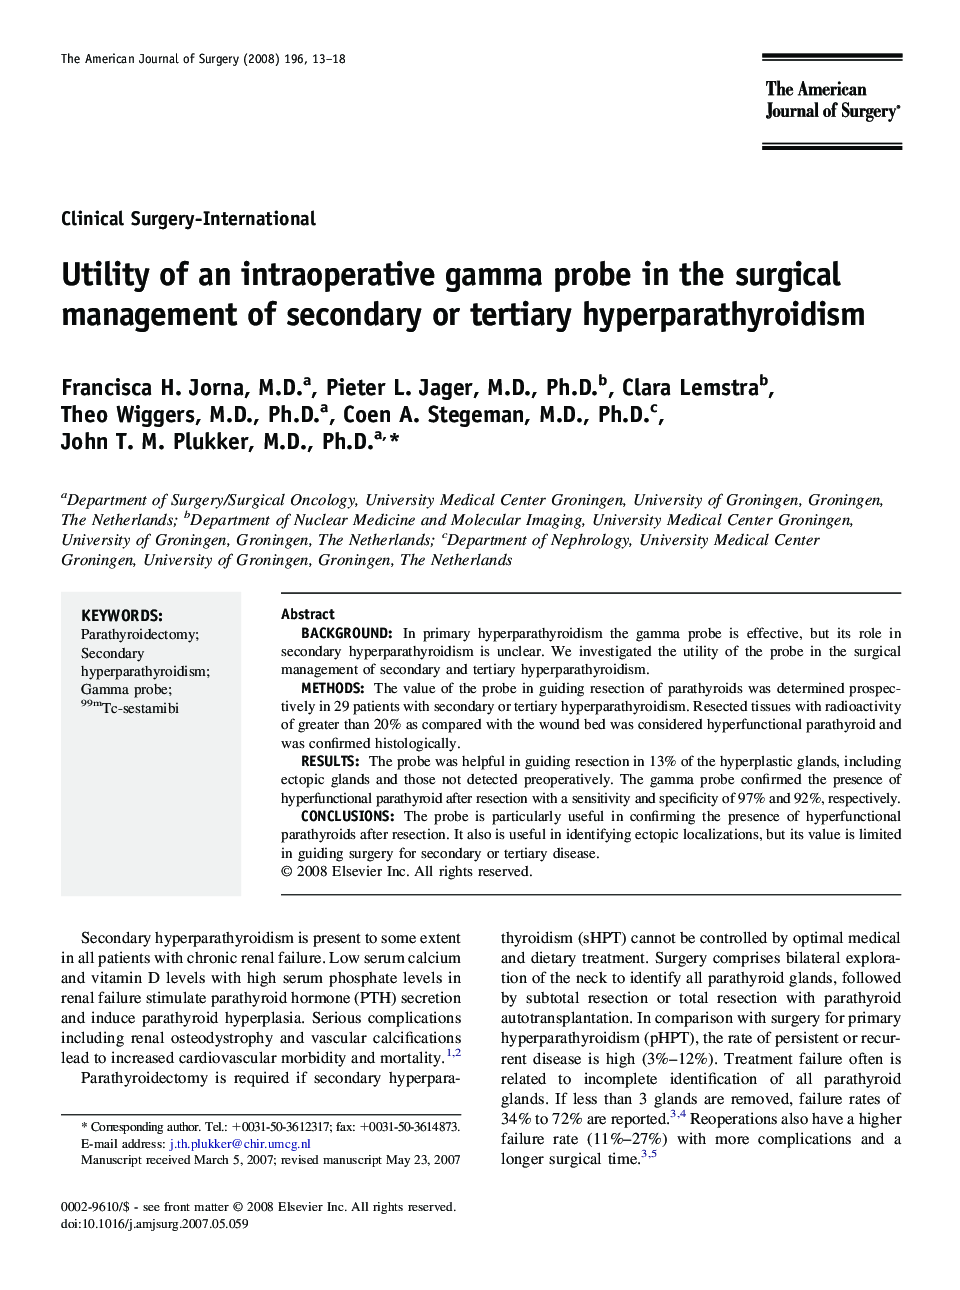 Utility of an intraoperative gamma probe in the surgical management of secondary or tertiary hyperparathyroidism